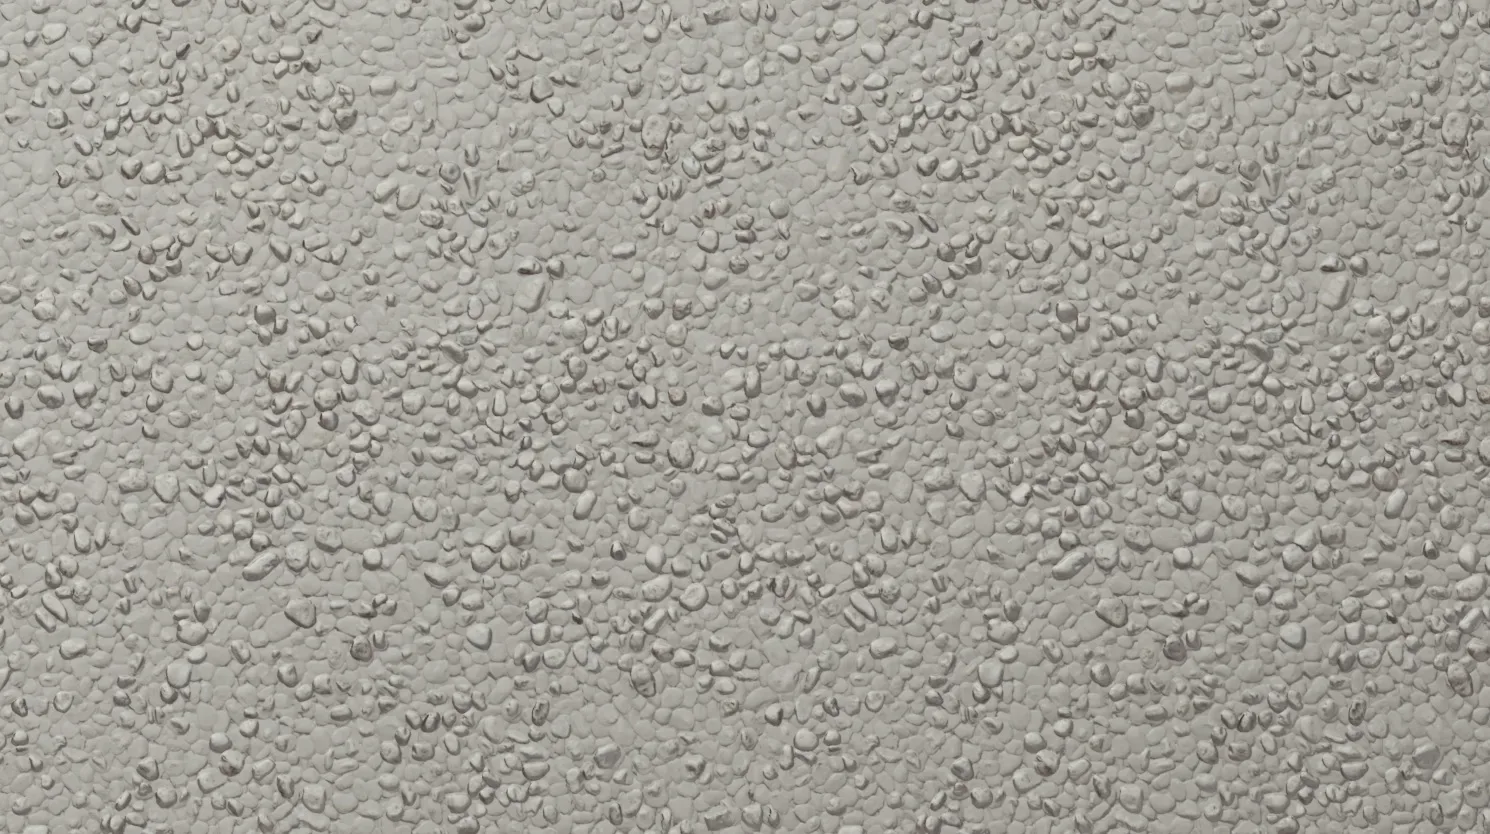 Whitewashed Wall Texture